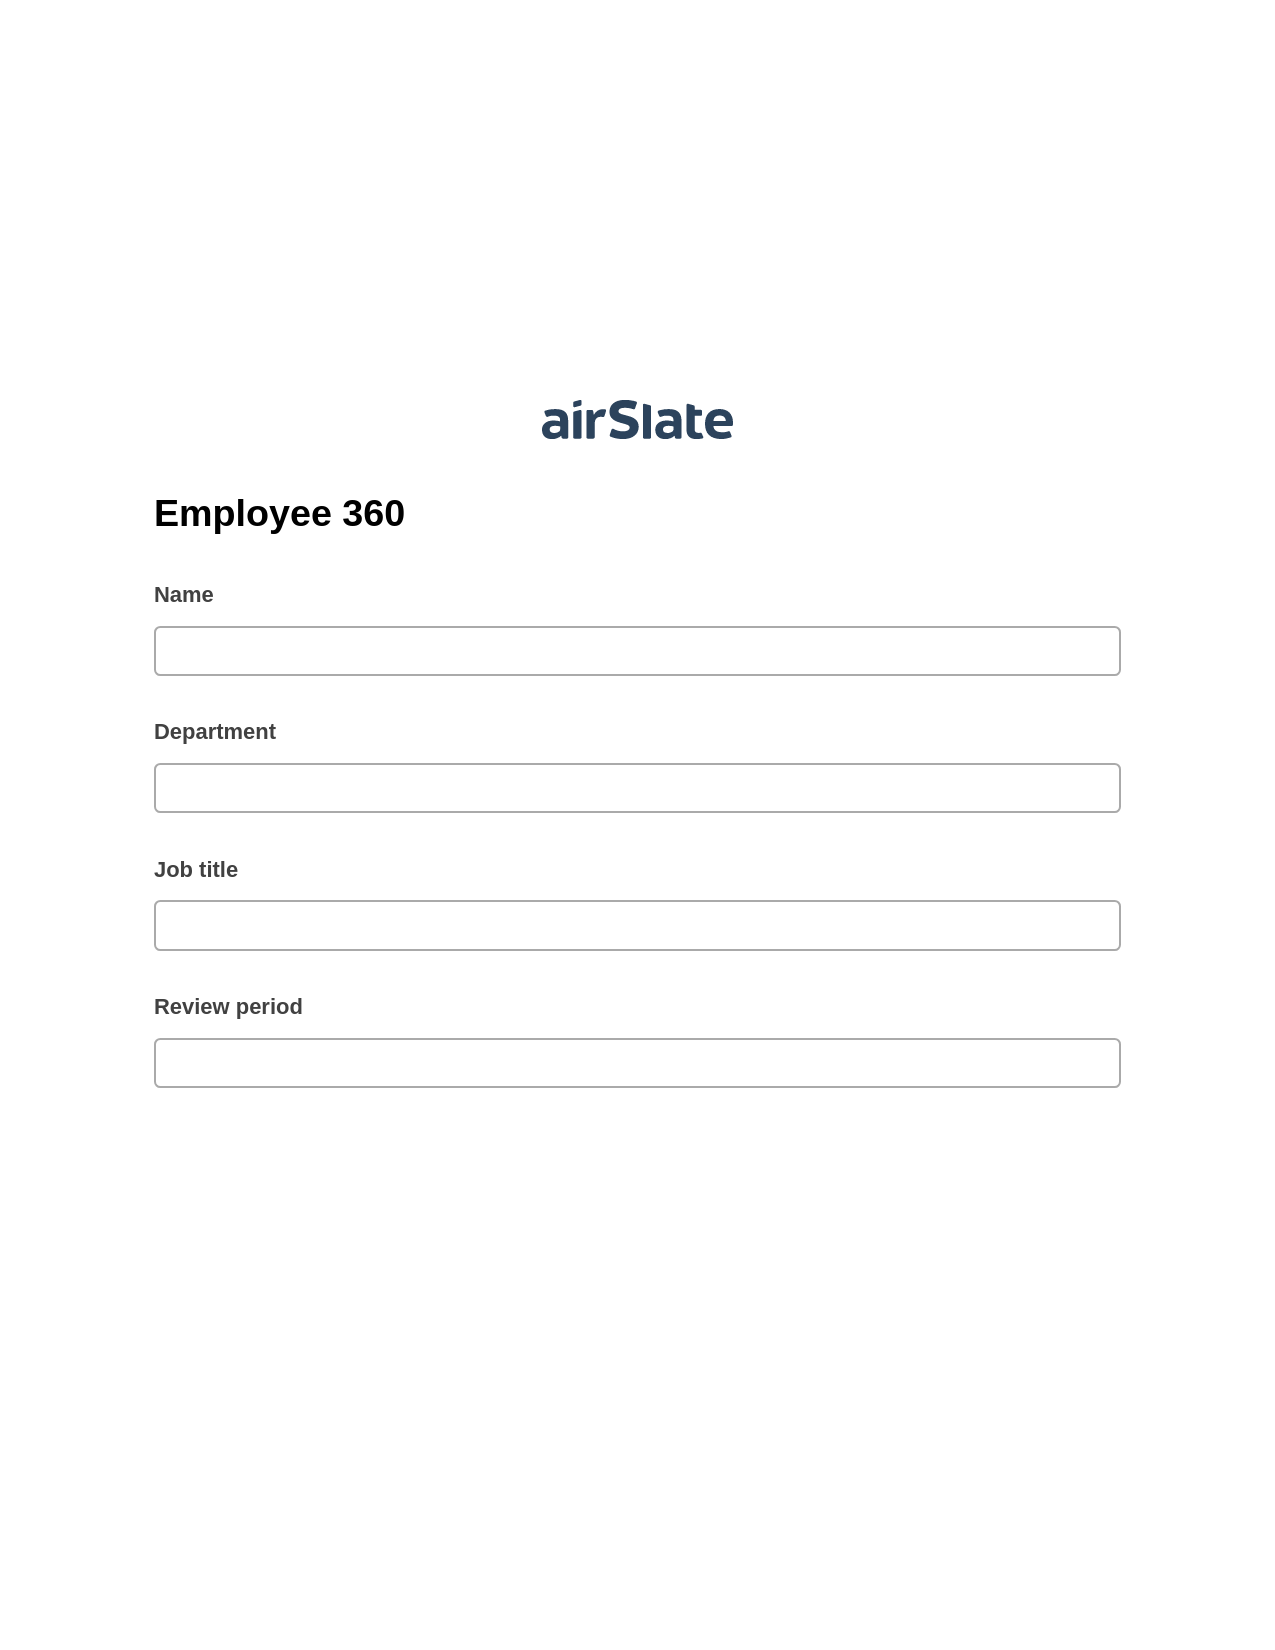 Employee 360 Pre-fill Dropdowns from Smartsheet Bot, Update MS Dynamics 365 Record Bot, Export to Excel 365 Bot